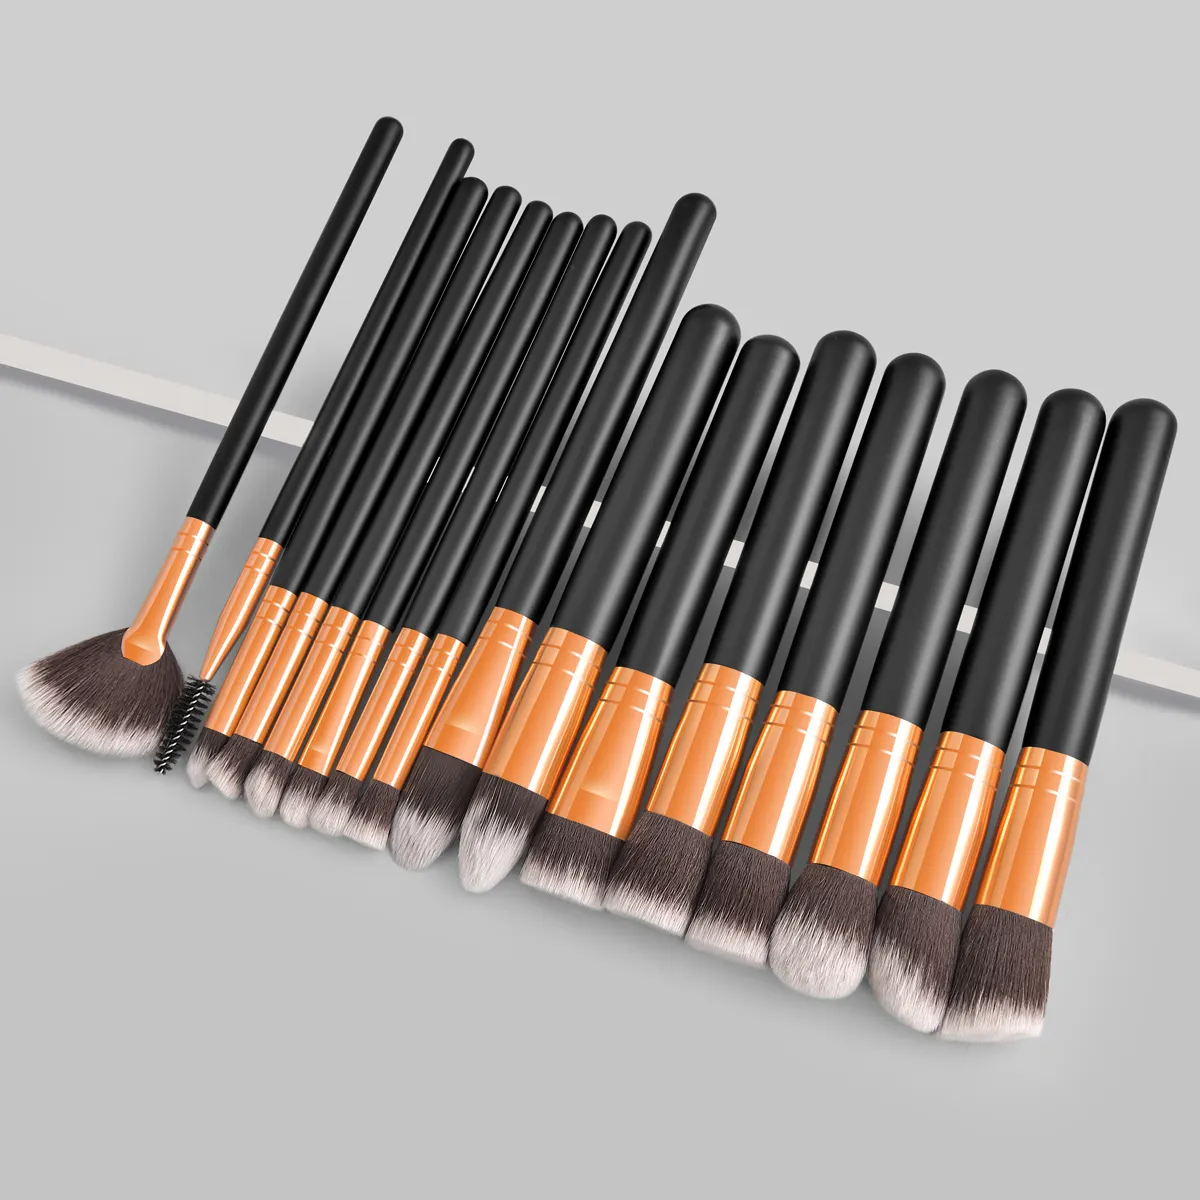 Cosmetics factory wholesale high quality professional makeup brush set 16 pieces black Eyeshadow concealer brushes makeup tools